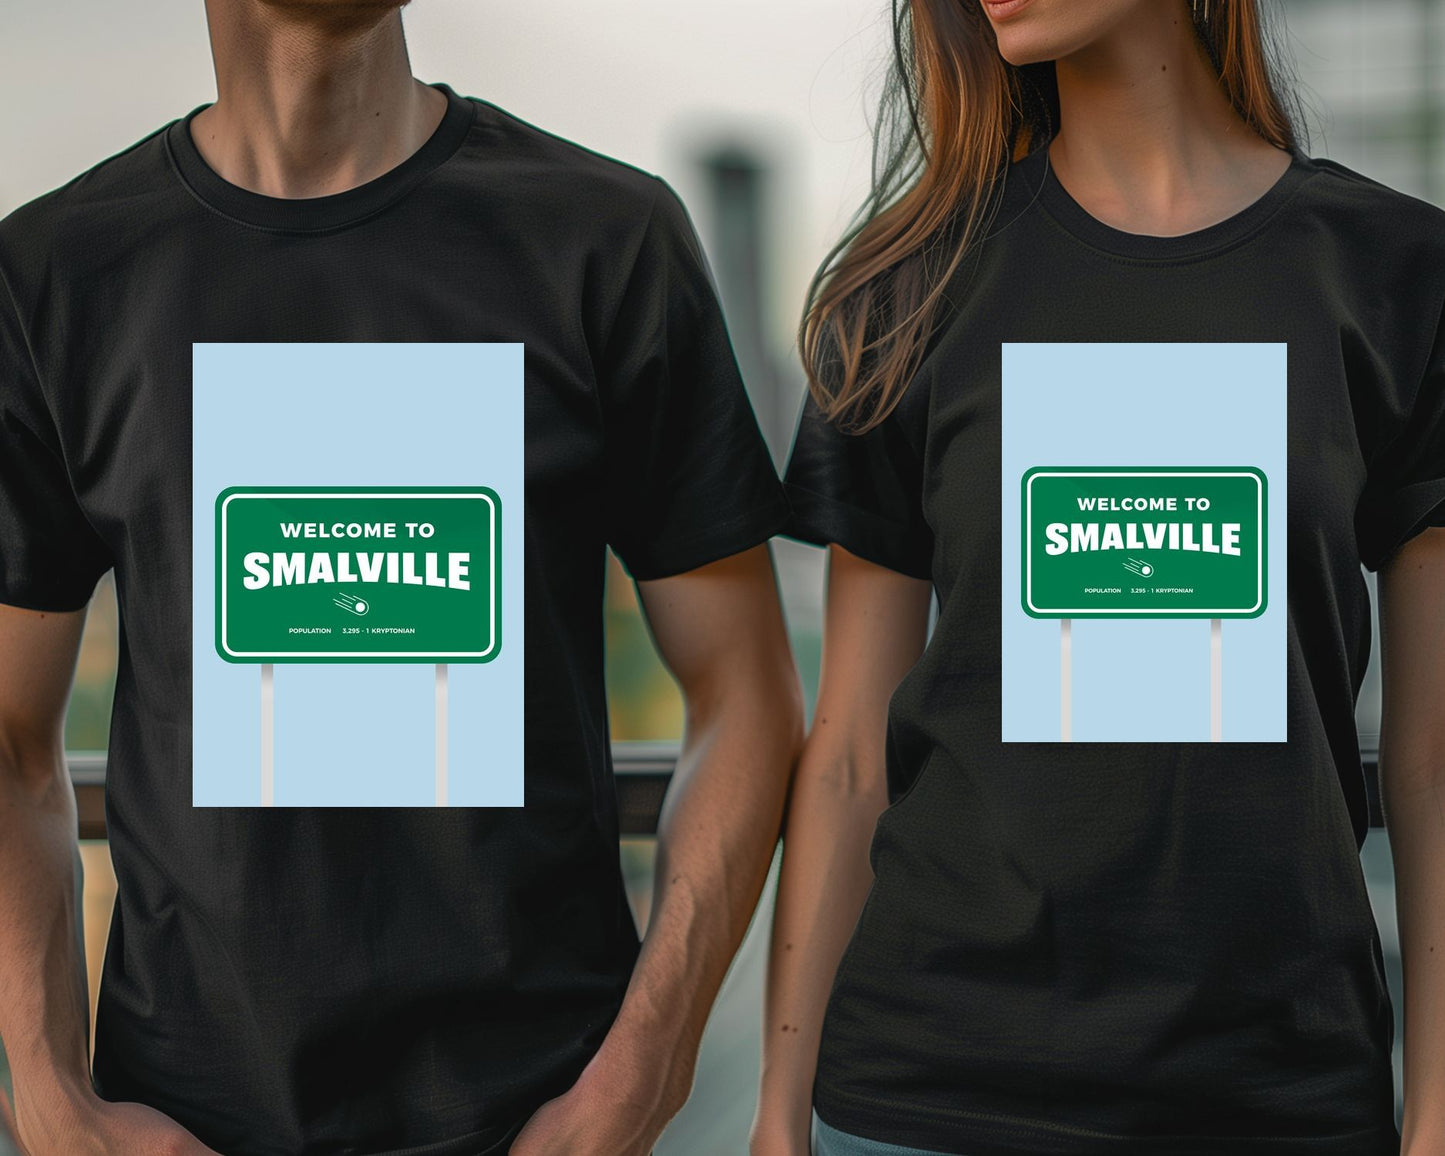 Welcome to Smallville - @donluisjimenez